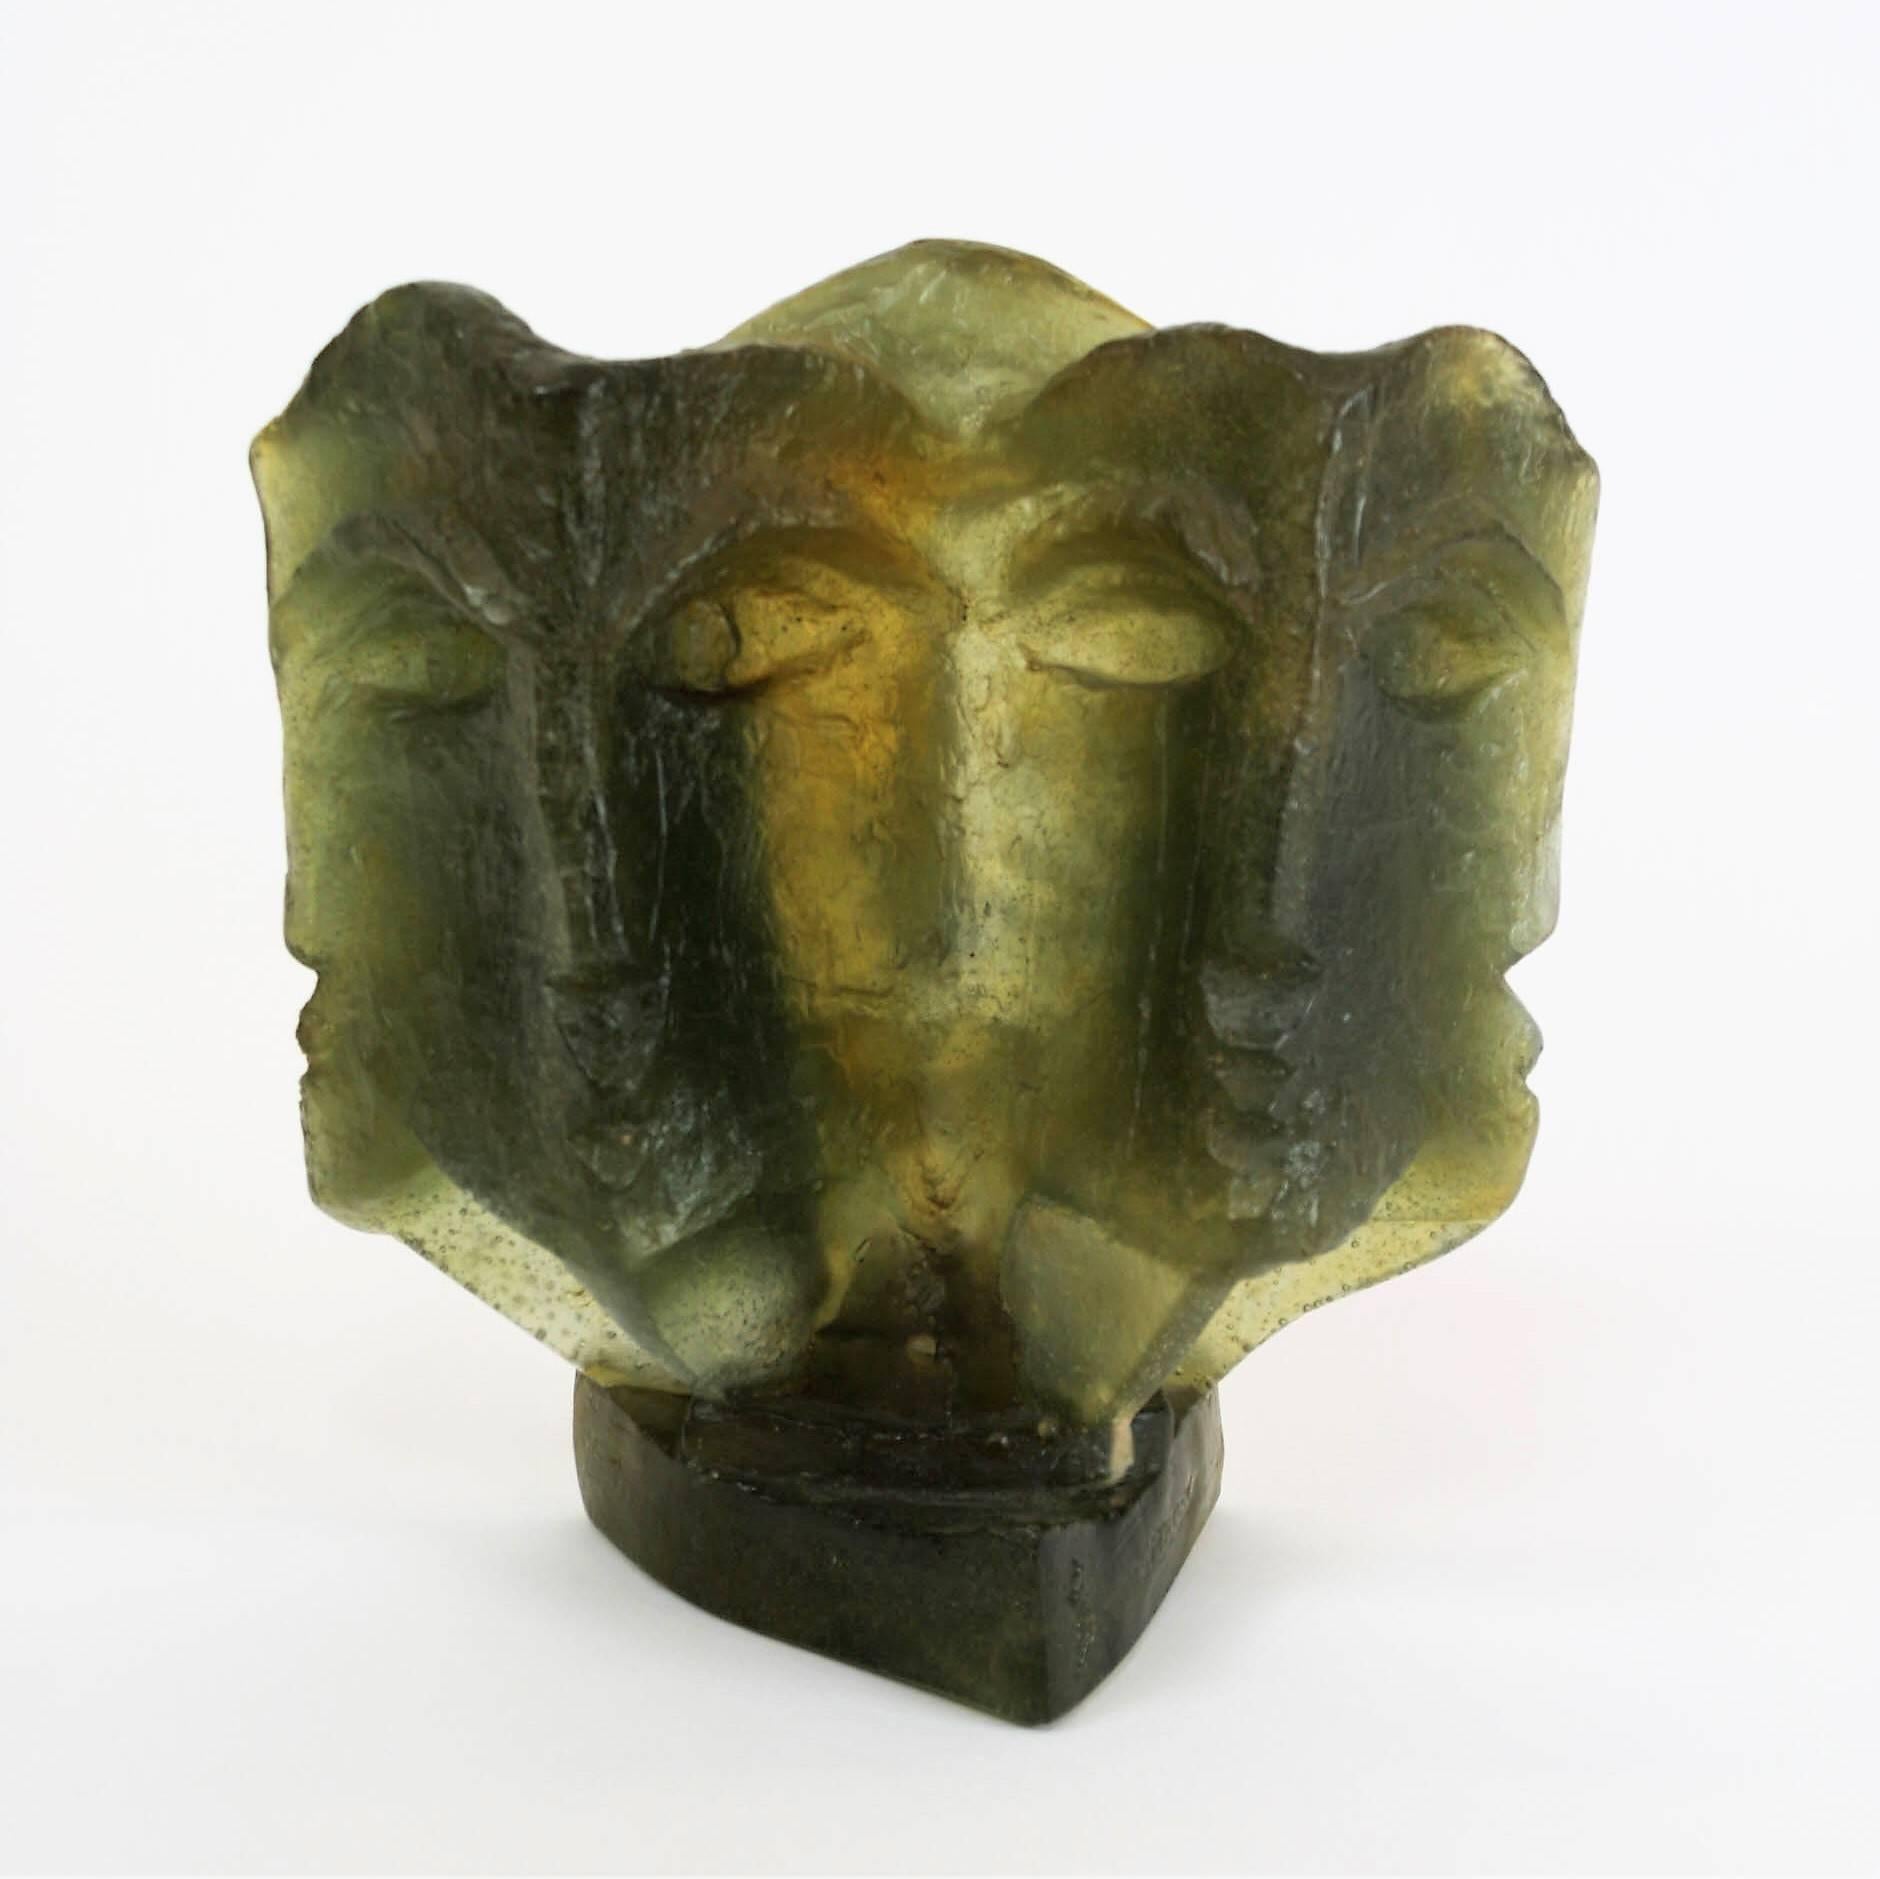 Abstract face in translucide molten glass edited  by DAUM  for the sculptor Bernard Citroen.
Cubist abstract shape, bottle green and amber pâte de verre sculpture, signed on the base Daum France, Citroen.